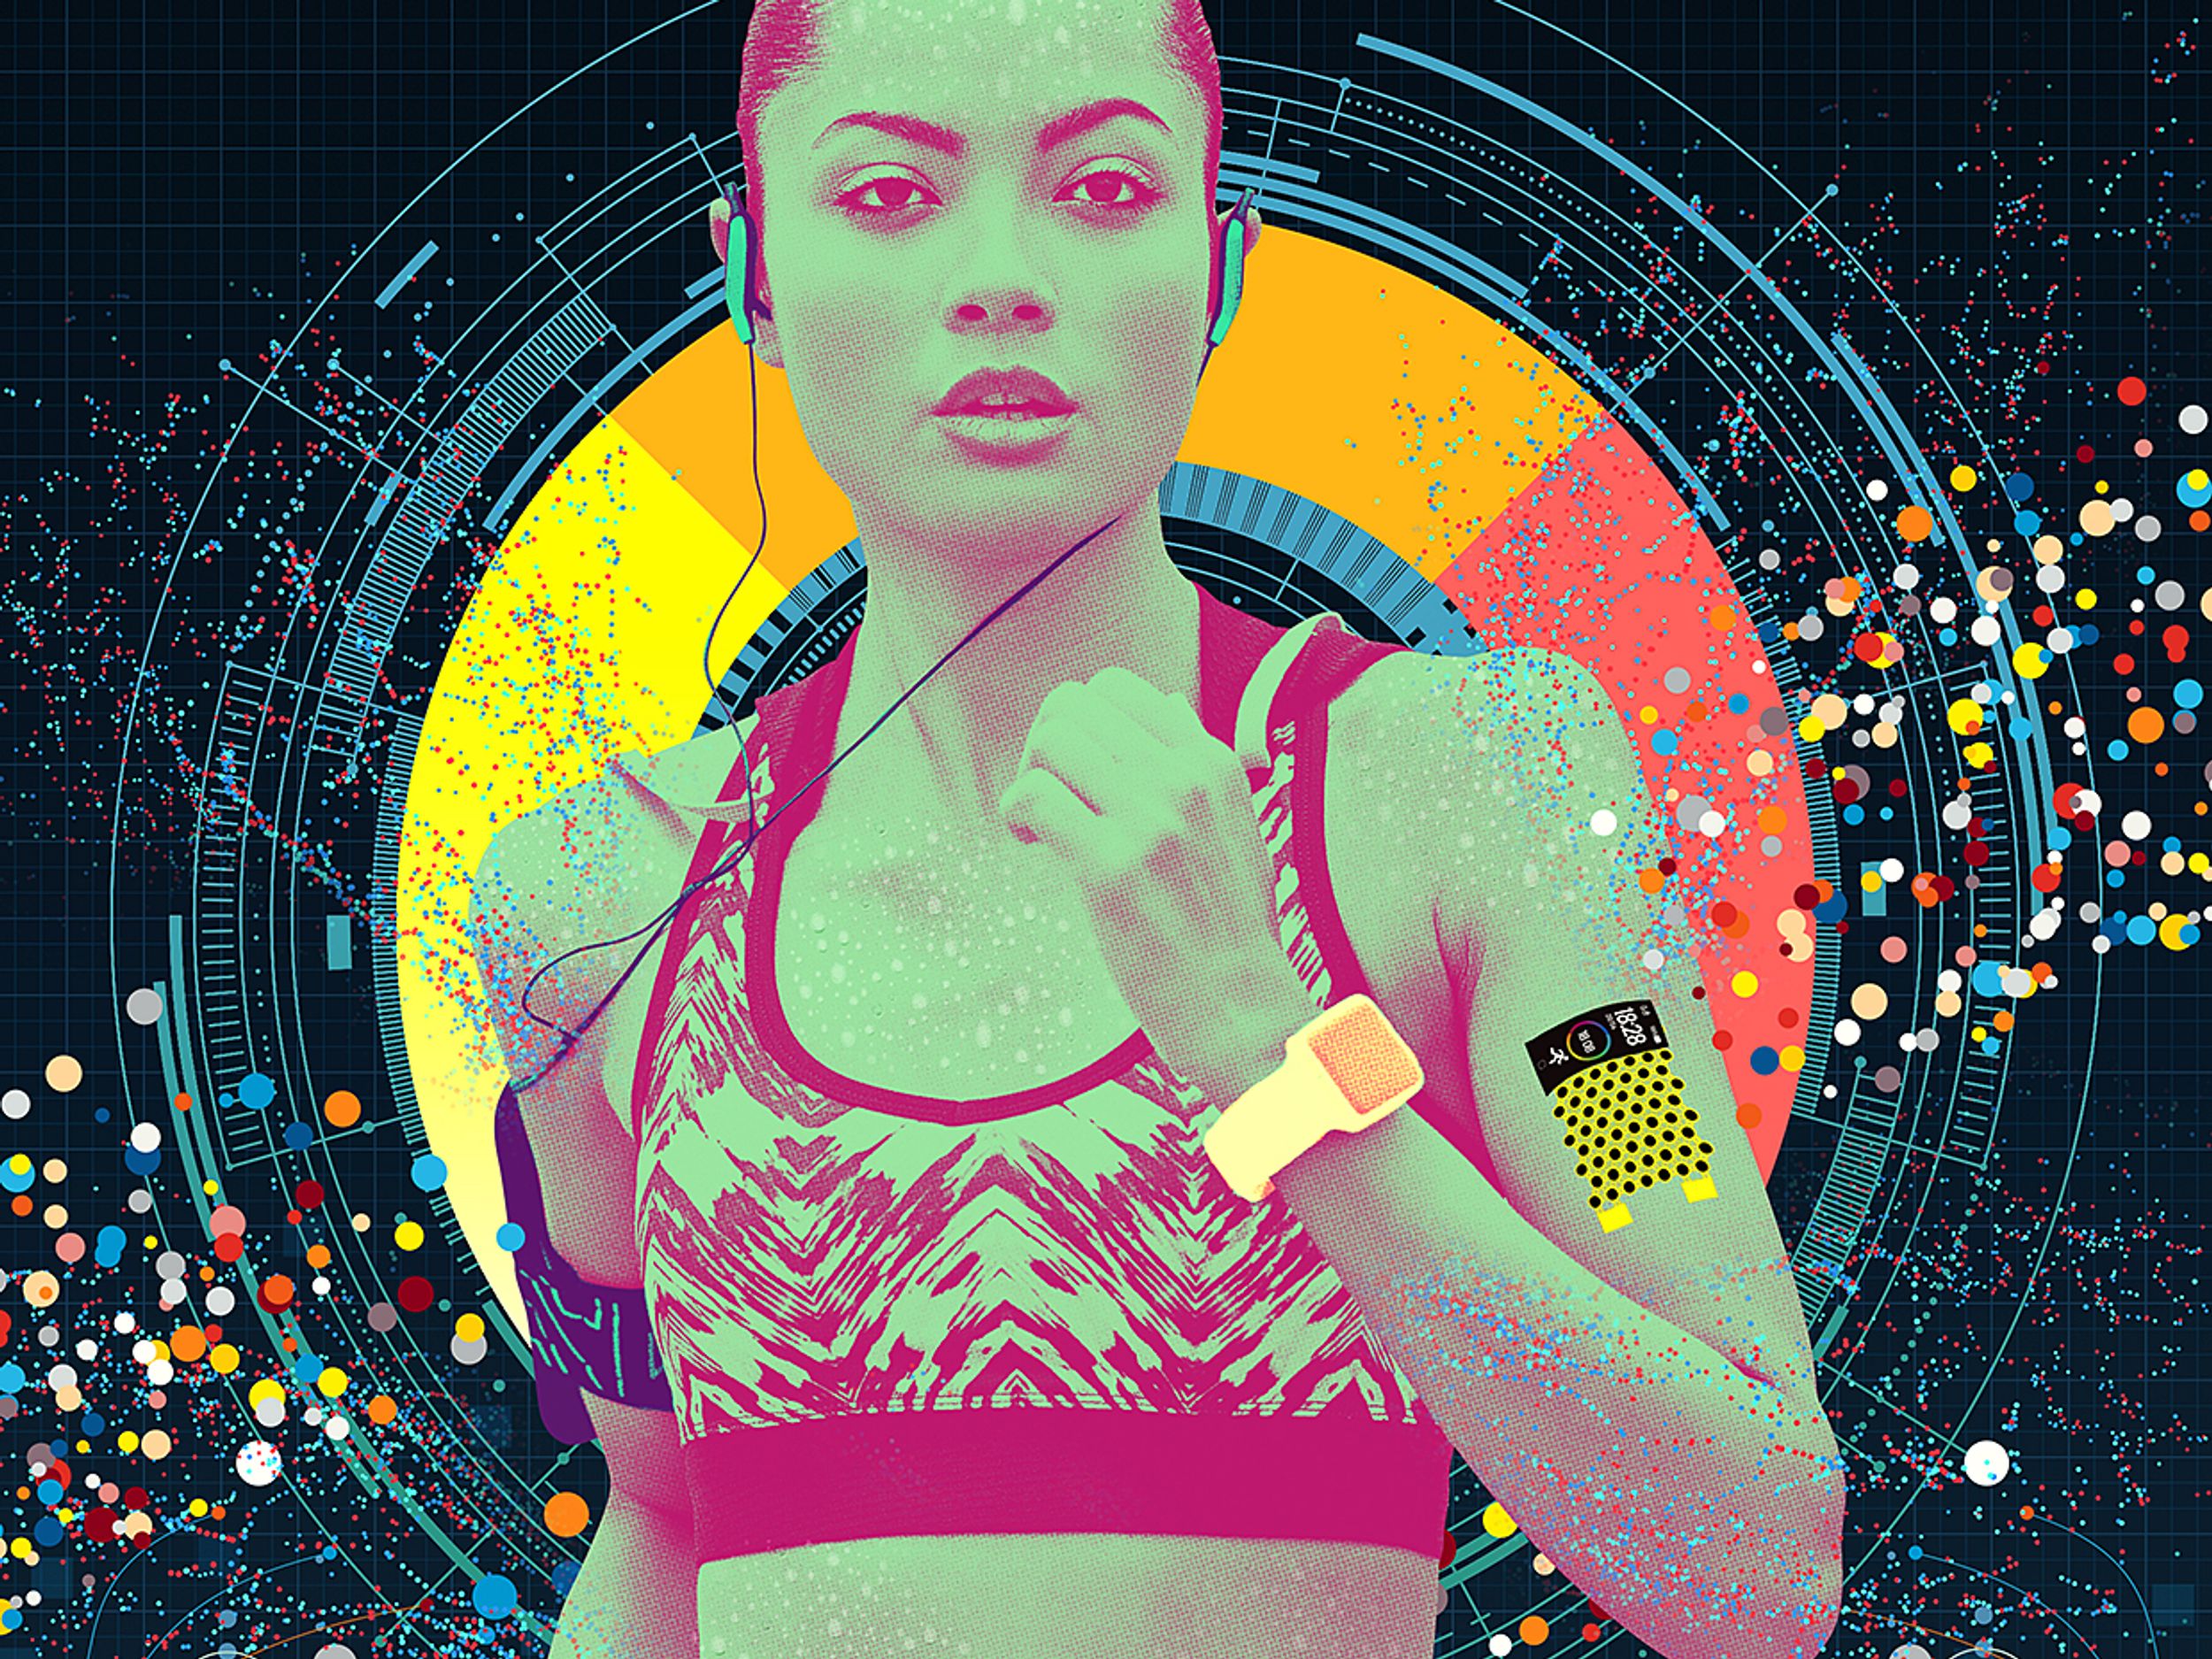 Illustration of woman jogging while wearing wearable devices.